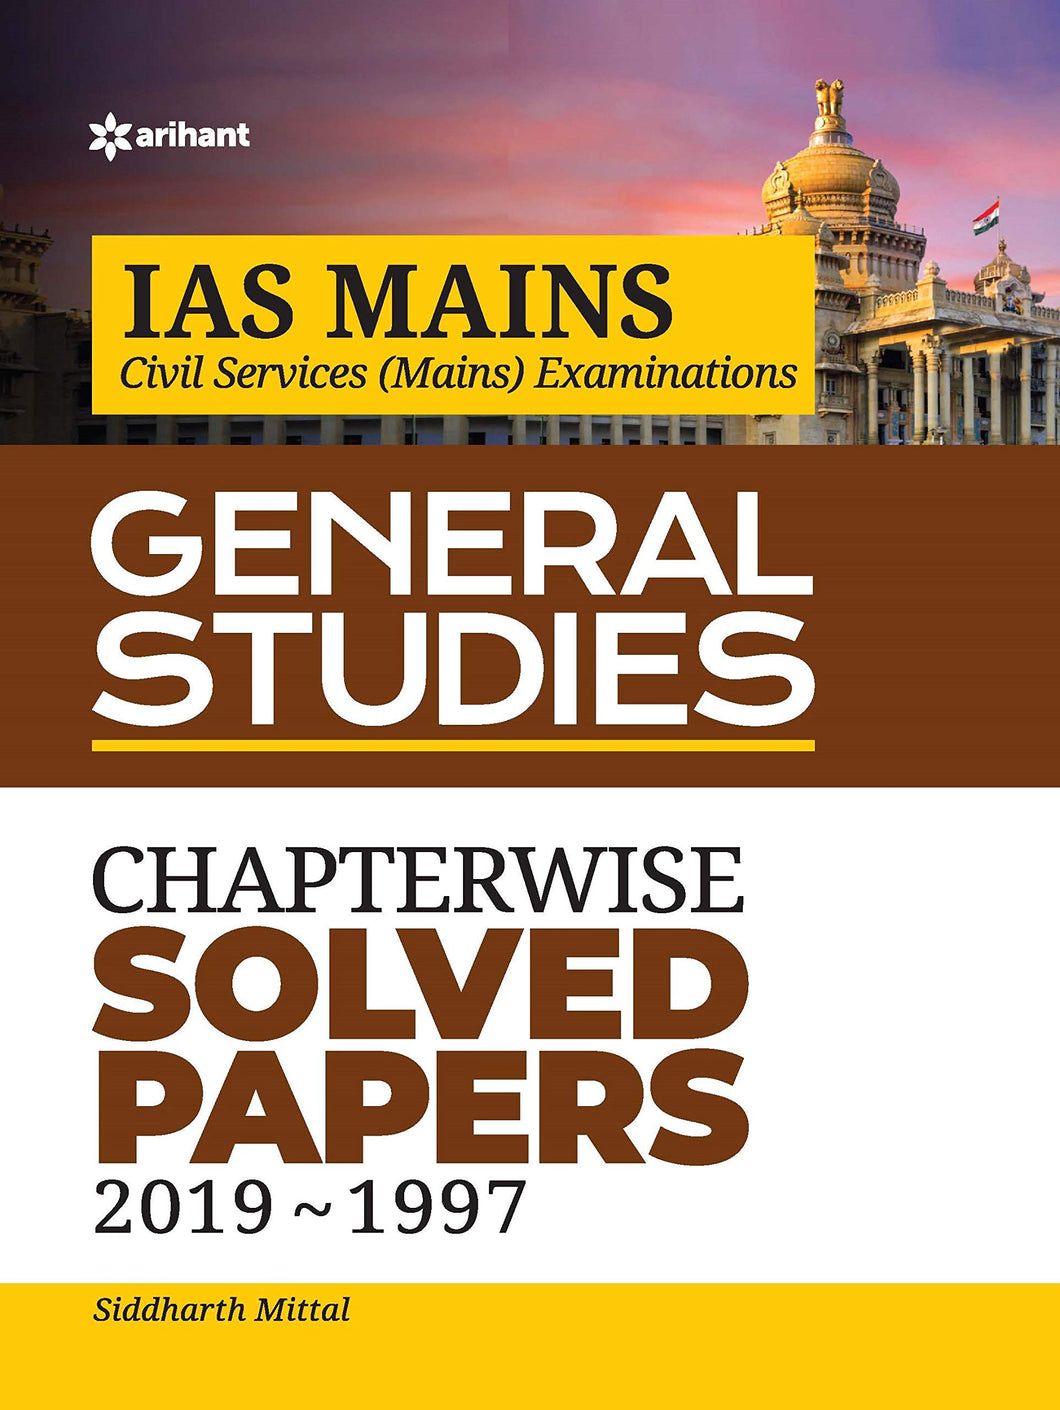 IAS Mains Chapterwise Solved Papers General Studies 2019-1997 Paperback – 13 November 2019